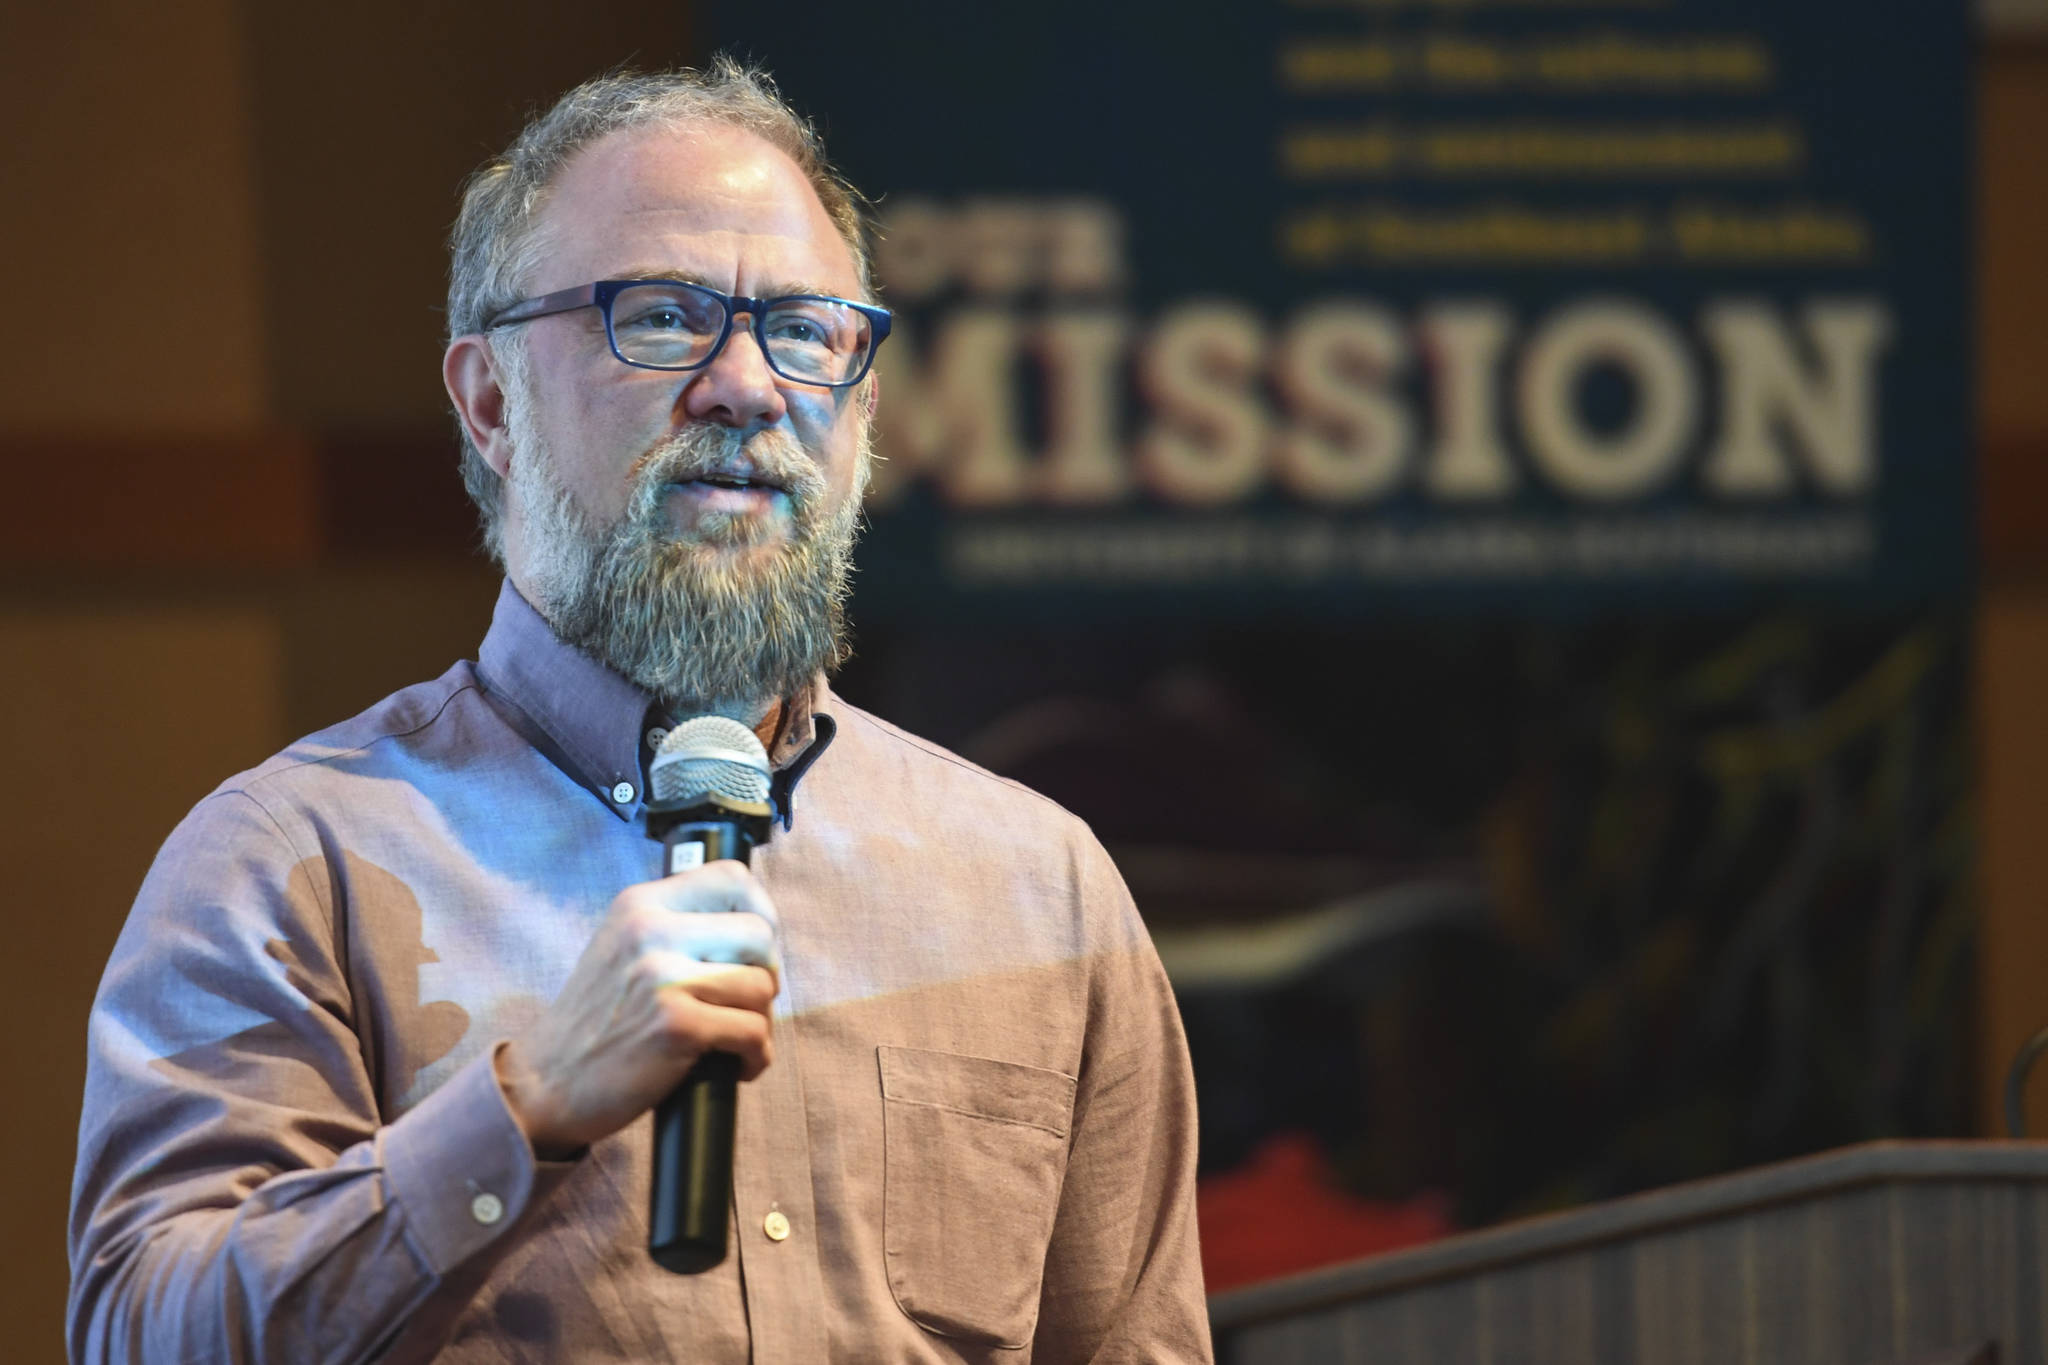 Aidan Key, director of Gender Diversity, speaks after the showing of the movie, “The Most Dangerous Year” at the University of Alaska on Thursday, June 6, 2019. (Michael Penn | Juneau Empire)